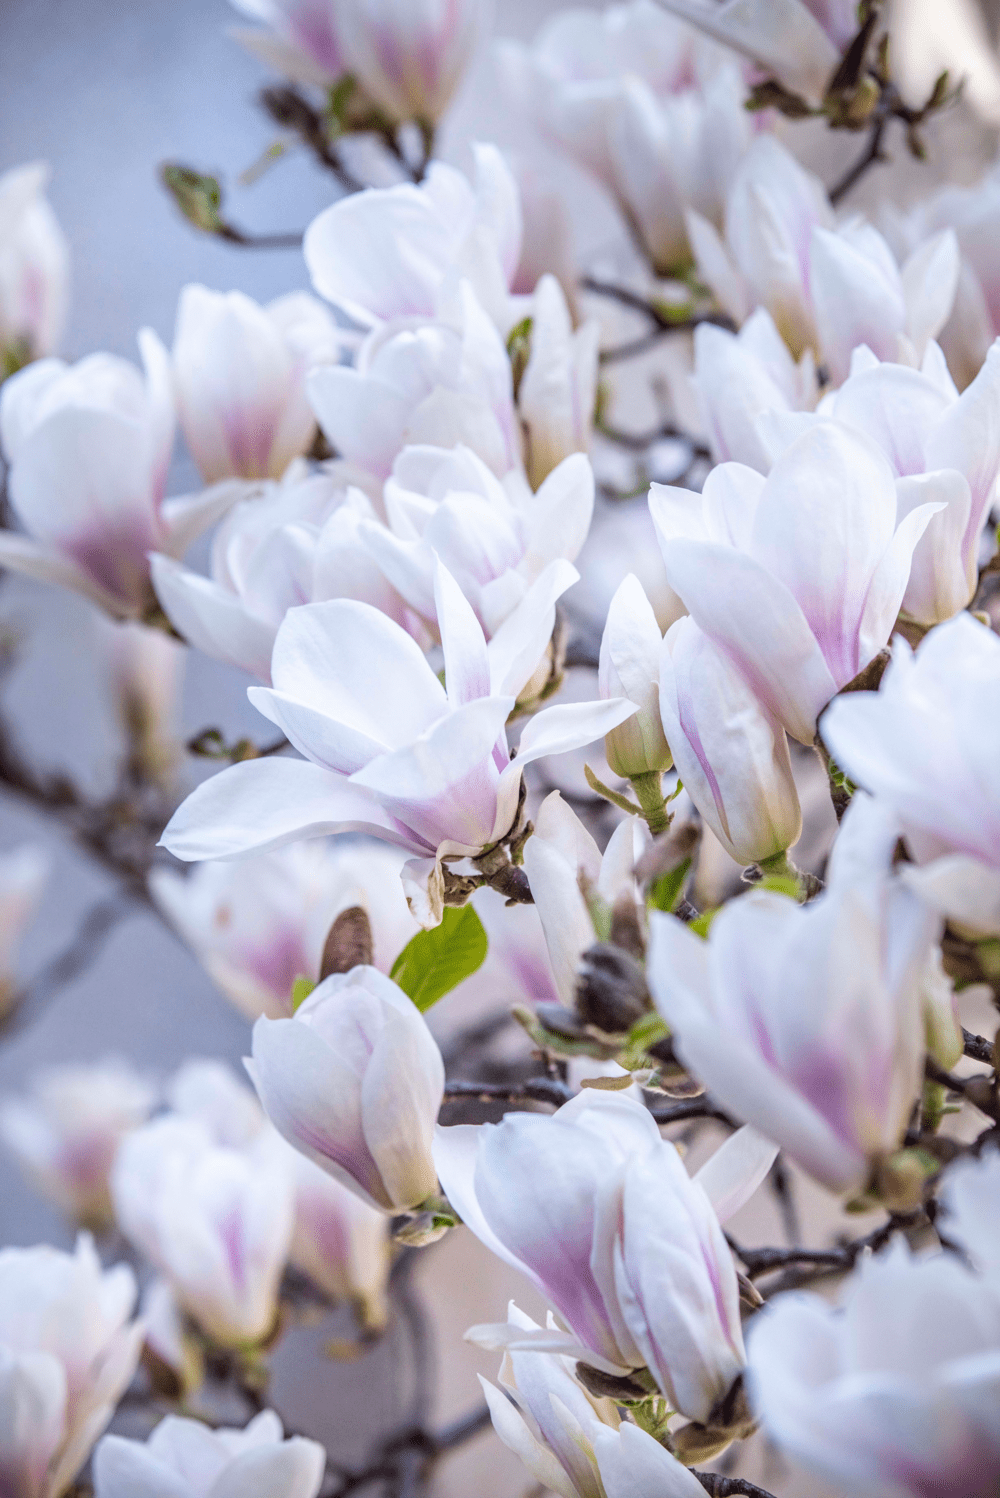 Magnolia may help with depression, anxiety, heart disease and even